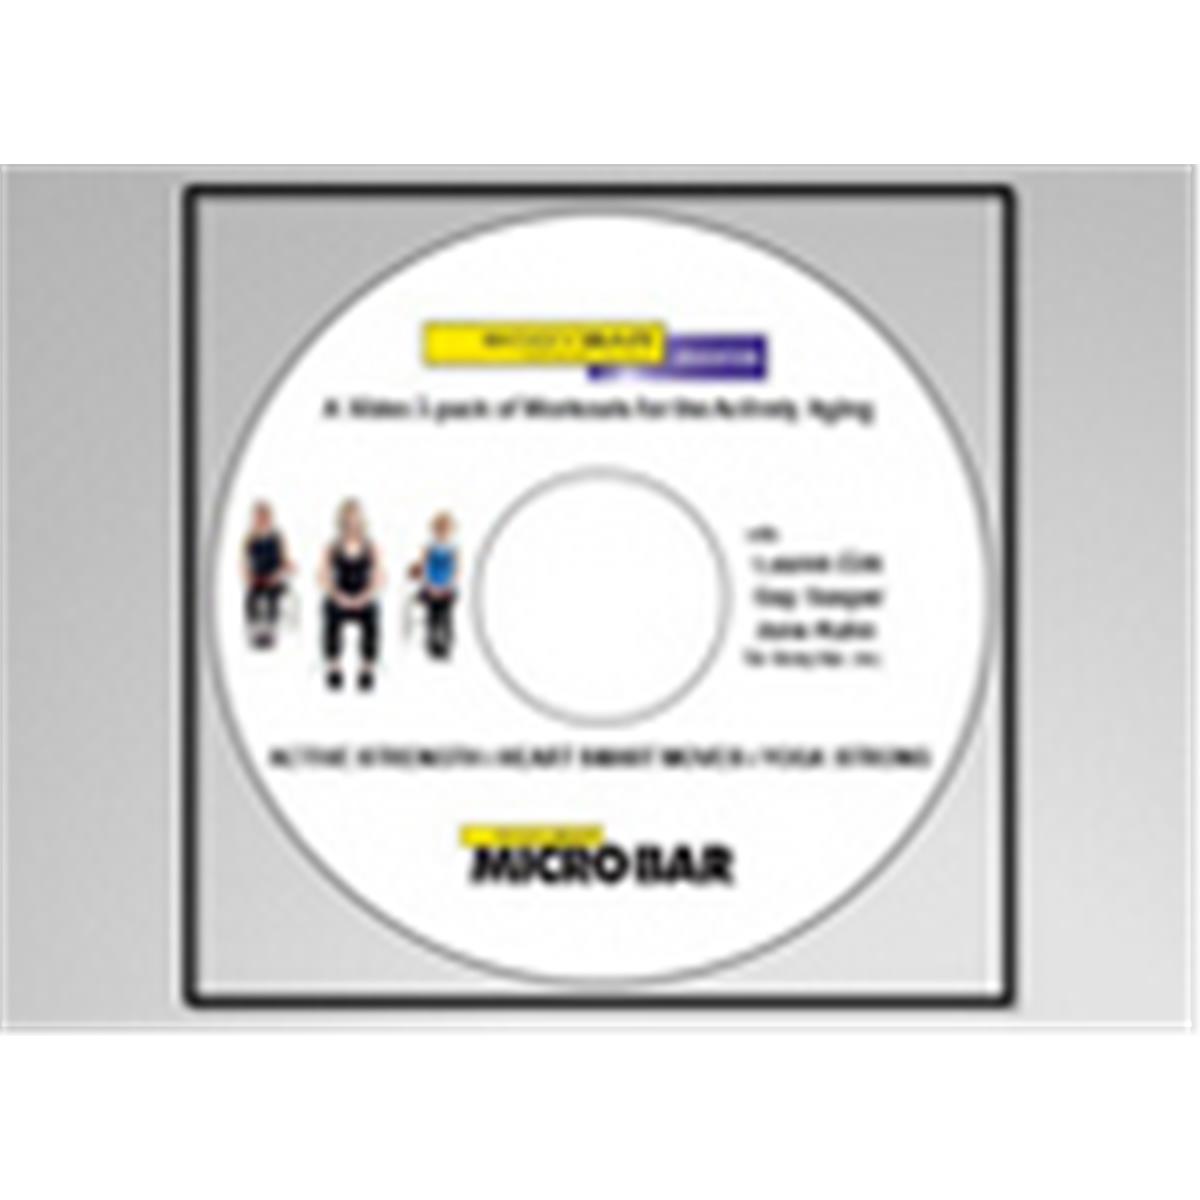 Picture of Body Bar DVD DVD-MMBCE Micro Bar Core Essentials Video